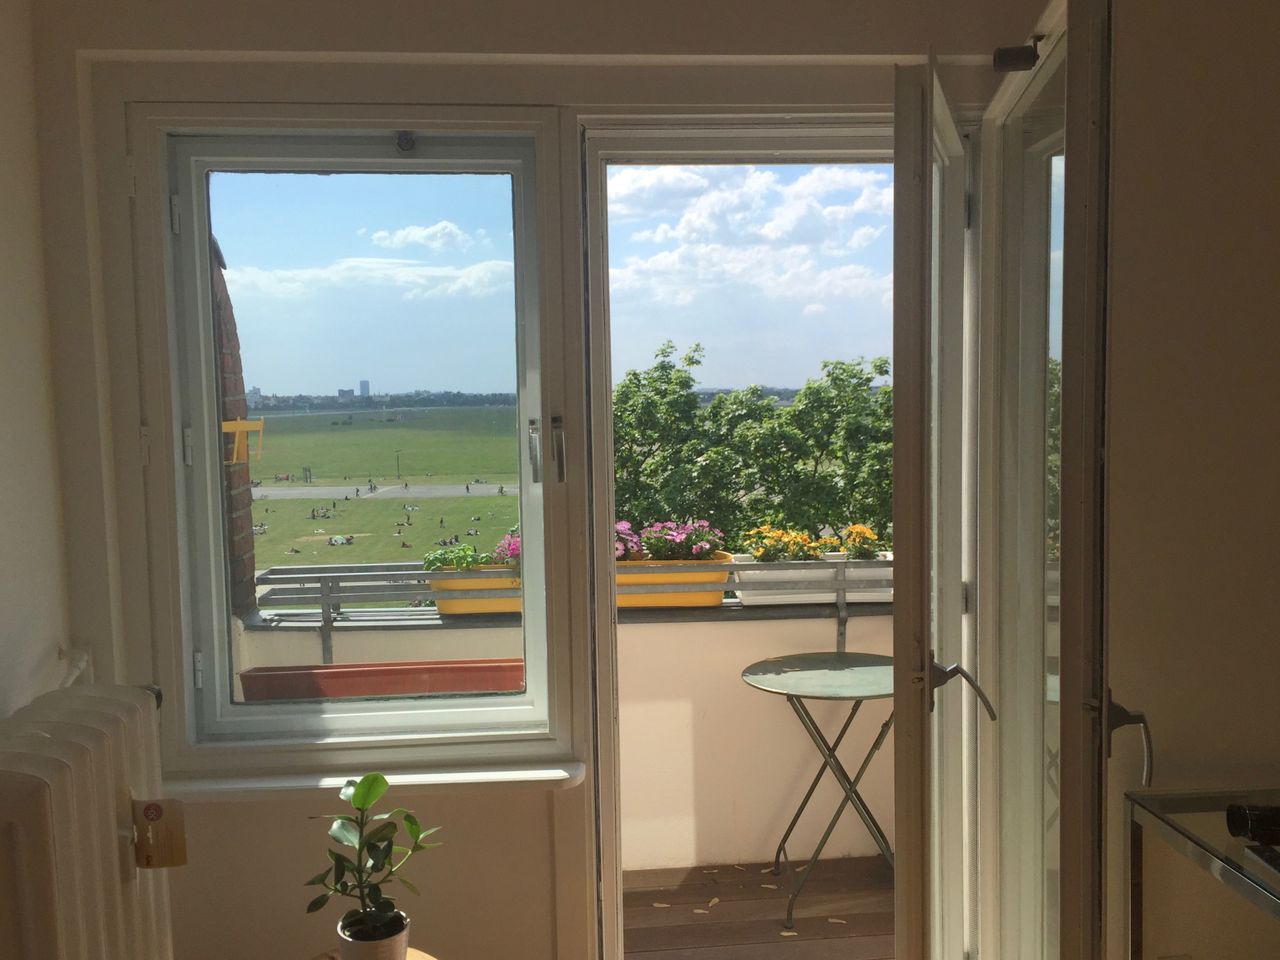 Cosy flat with amazing view over Park in Neukölln (Berlin)